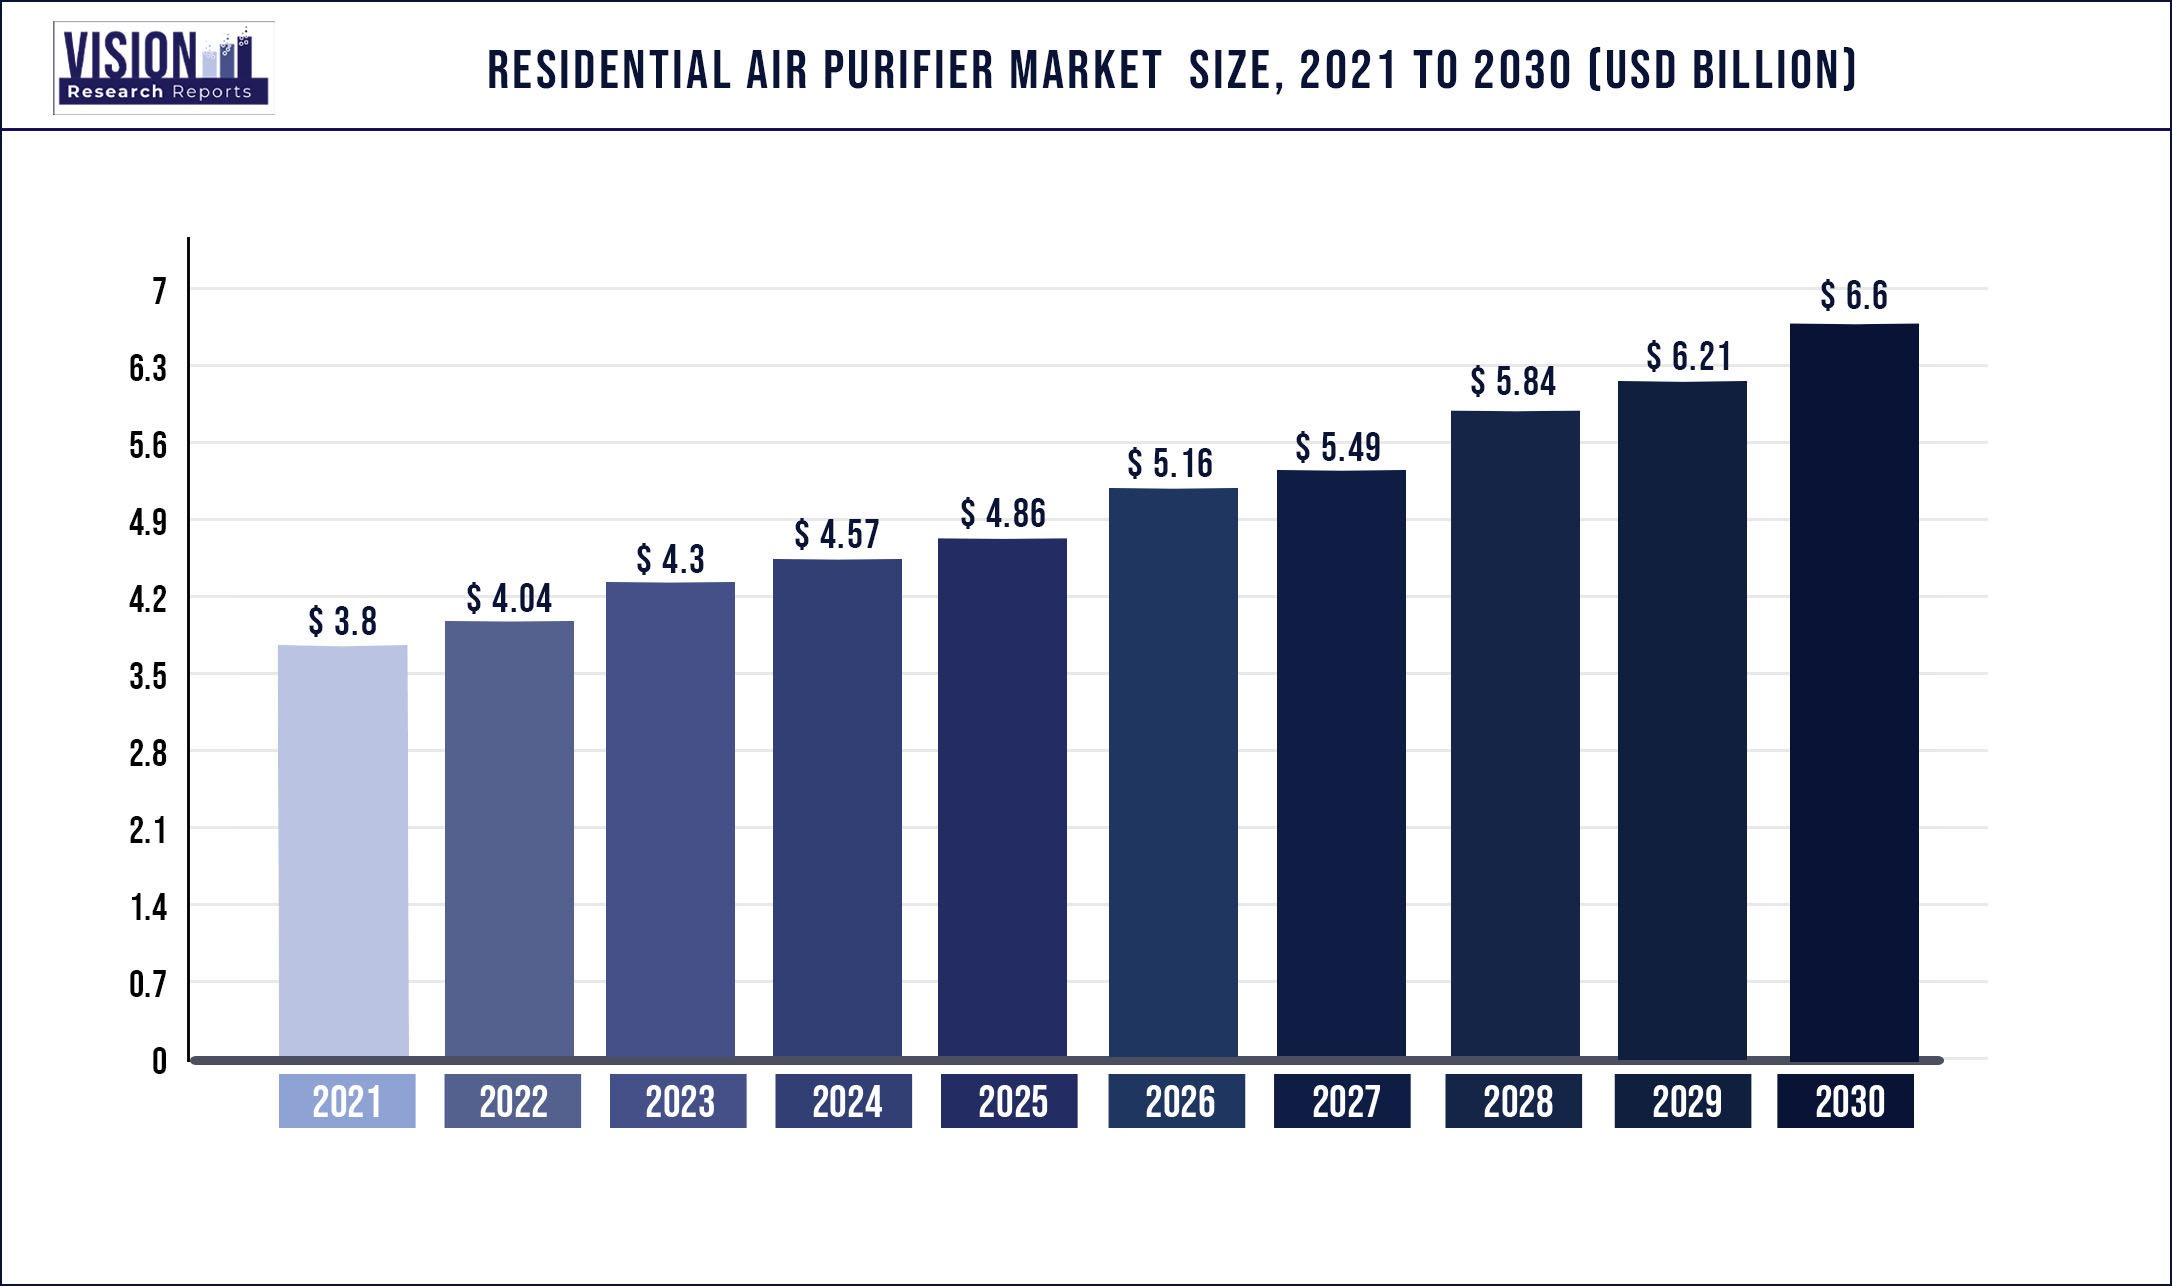 Residential Air Purifier Market Size 2021 to 2030